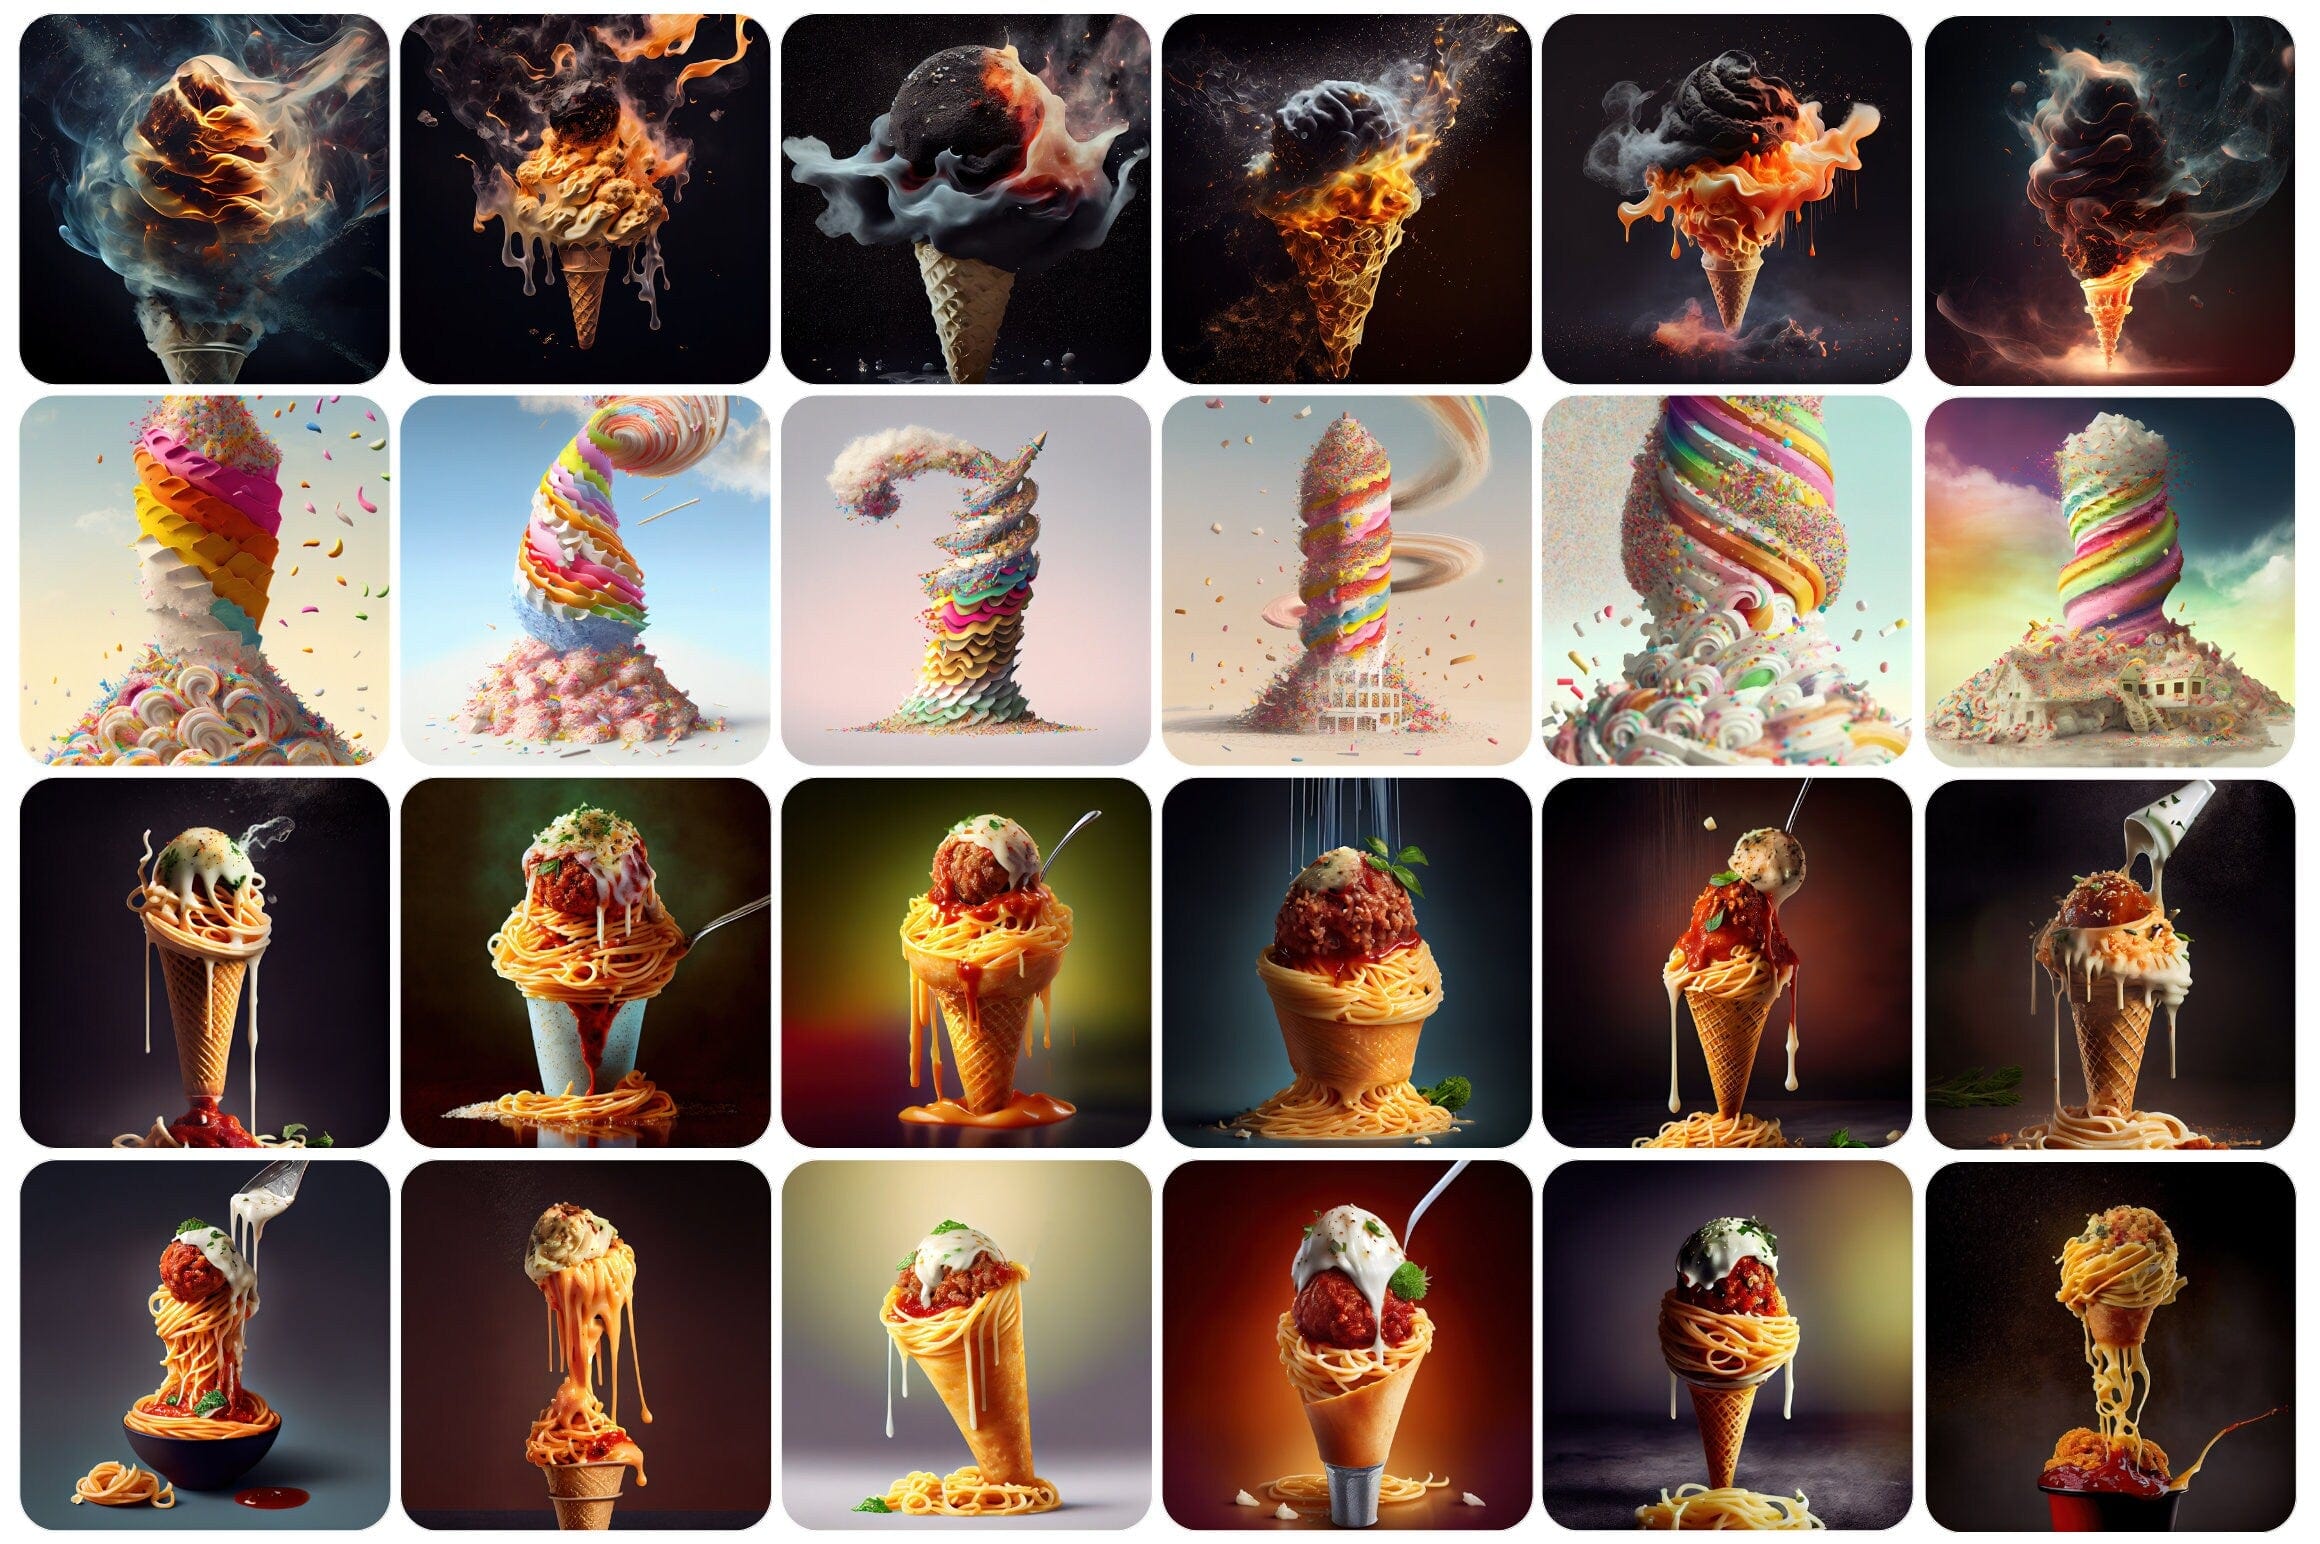 200+ Decadent Ice Cream & Cookie Images - Perfect for Sweet Treat Themed Projects - Commercial License Digital Download Sumobundle